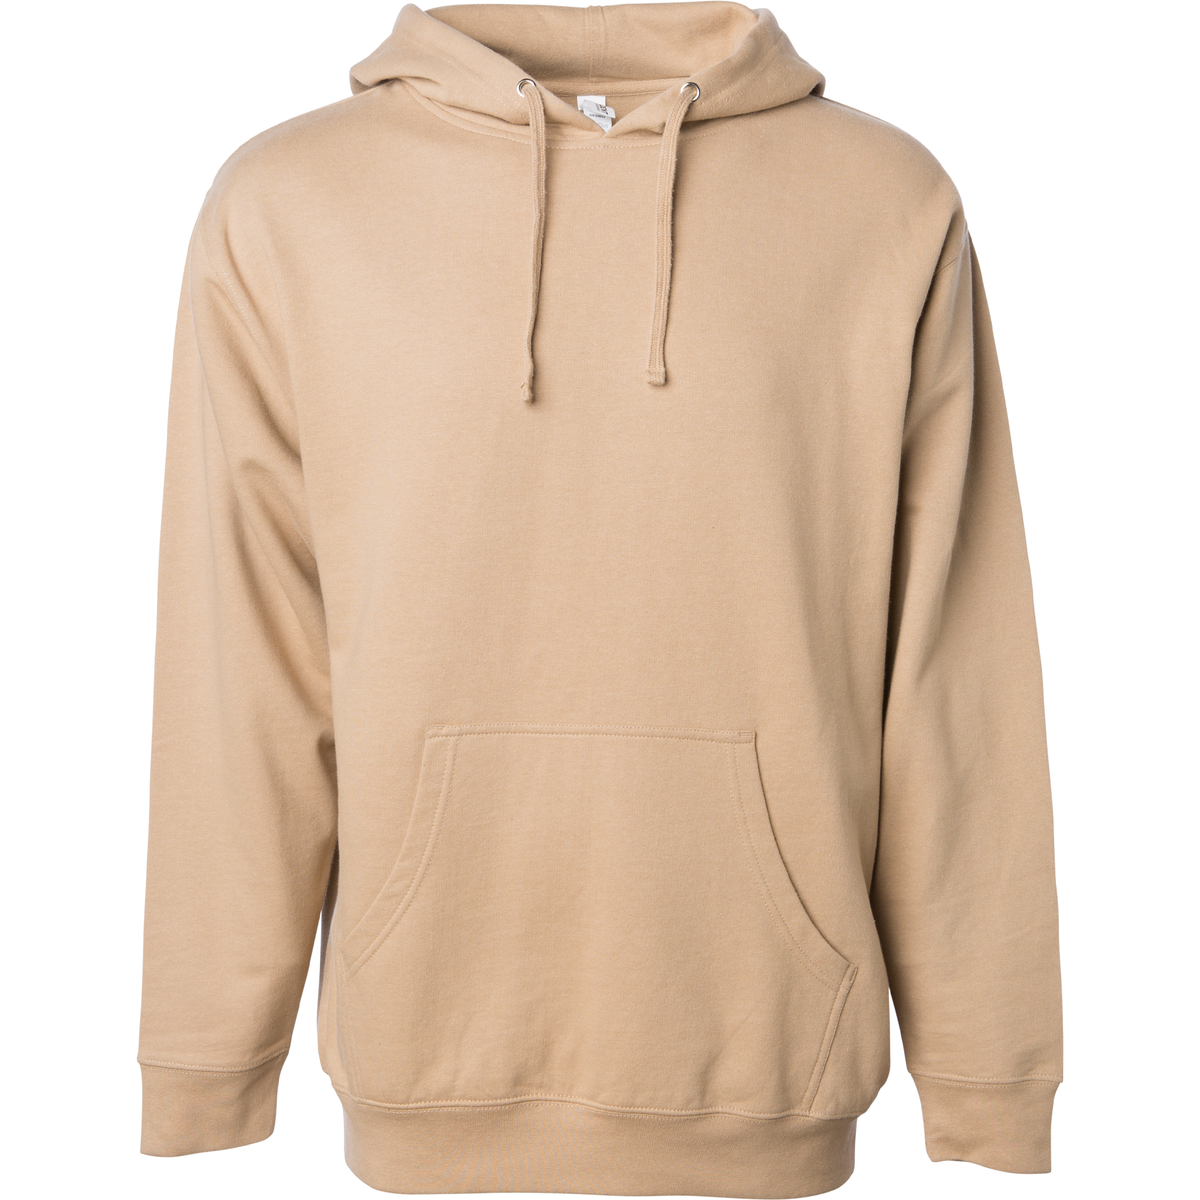 SS4500 #5 - Midweight Hooded Pullover Sweatshirt